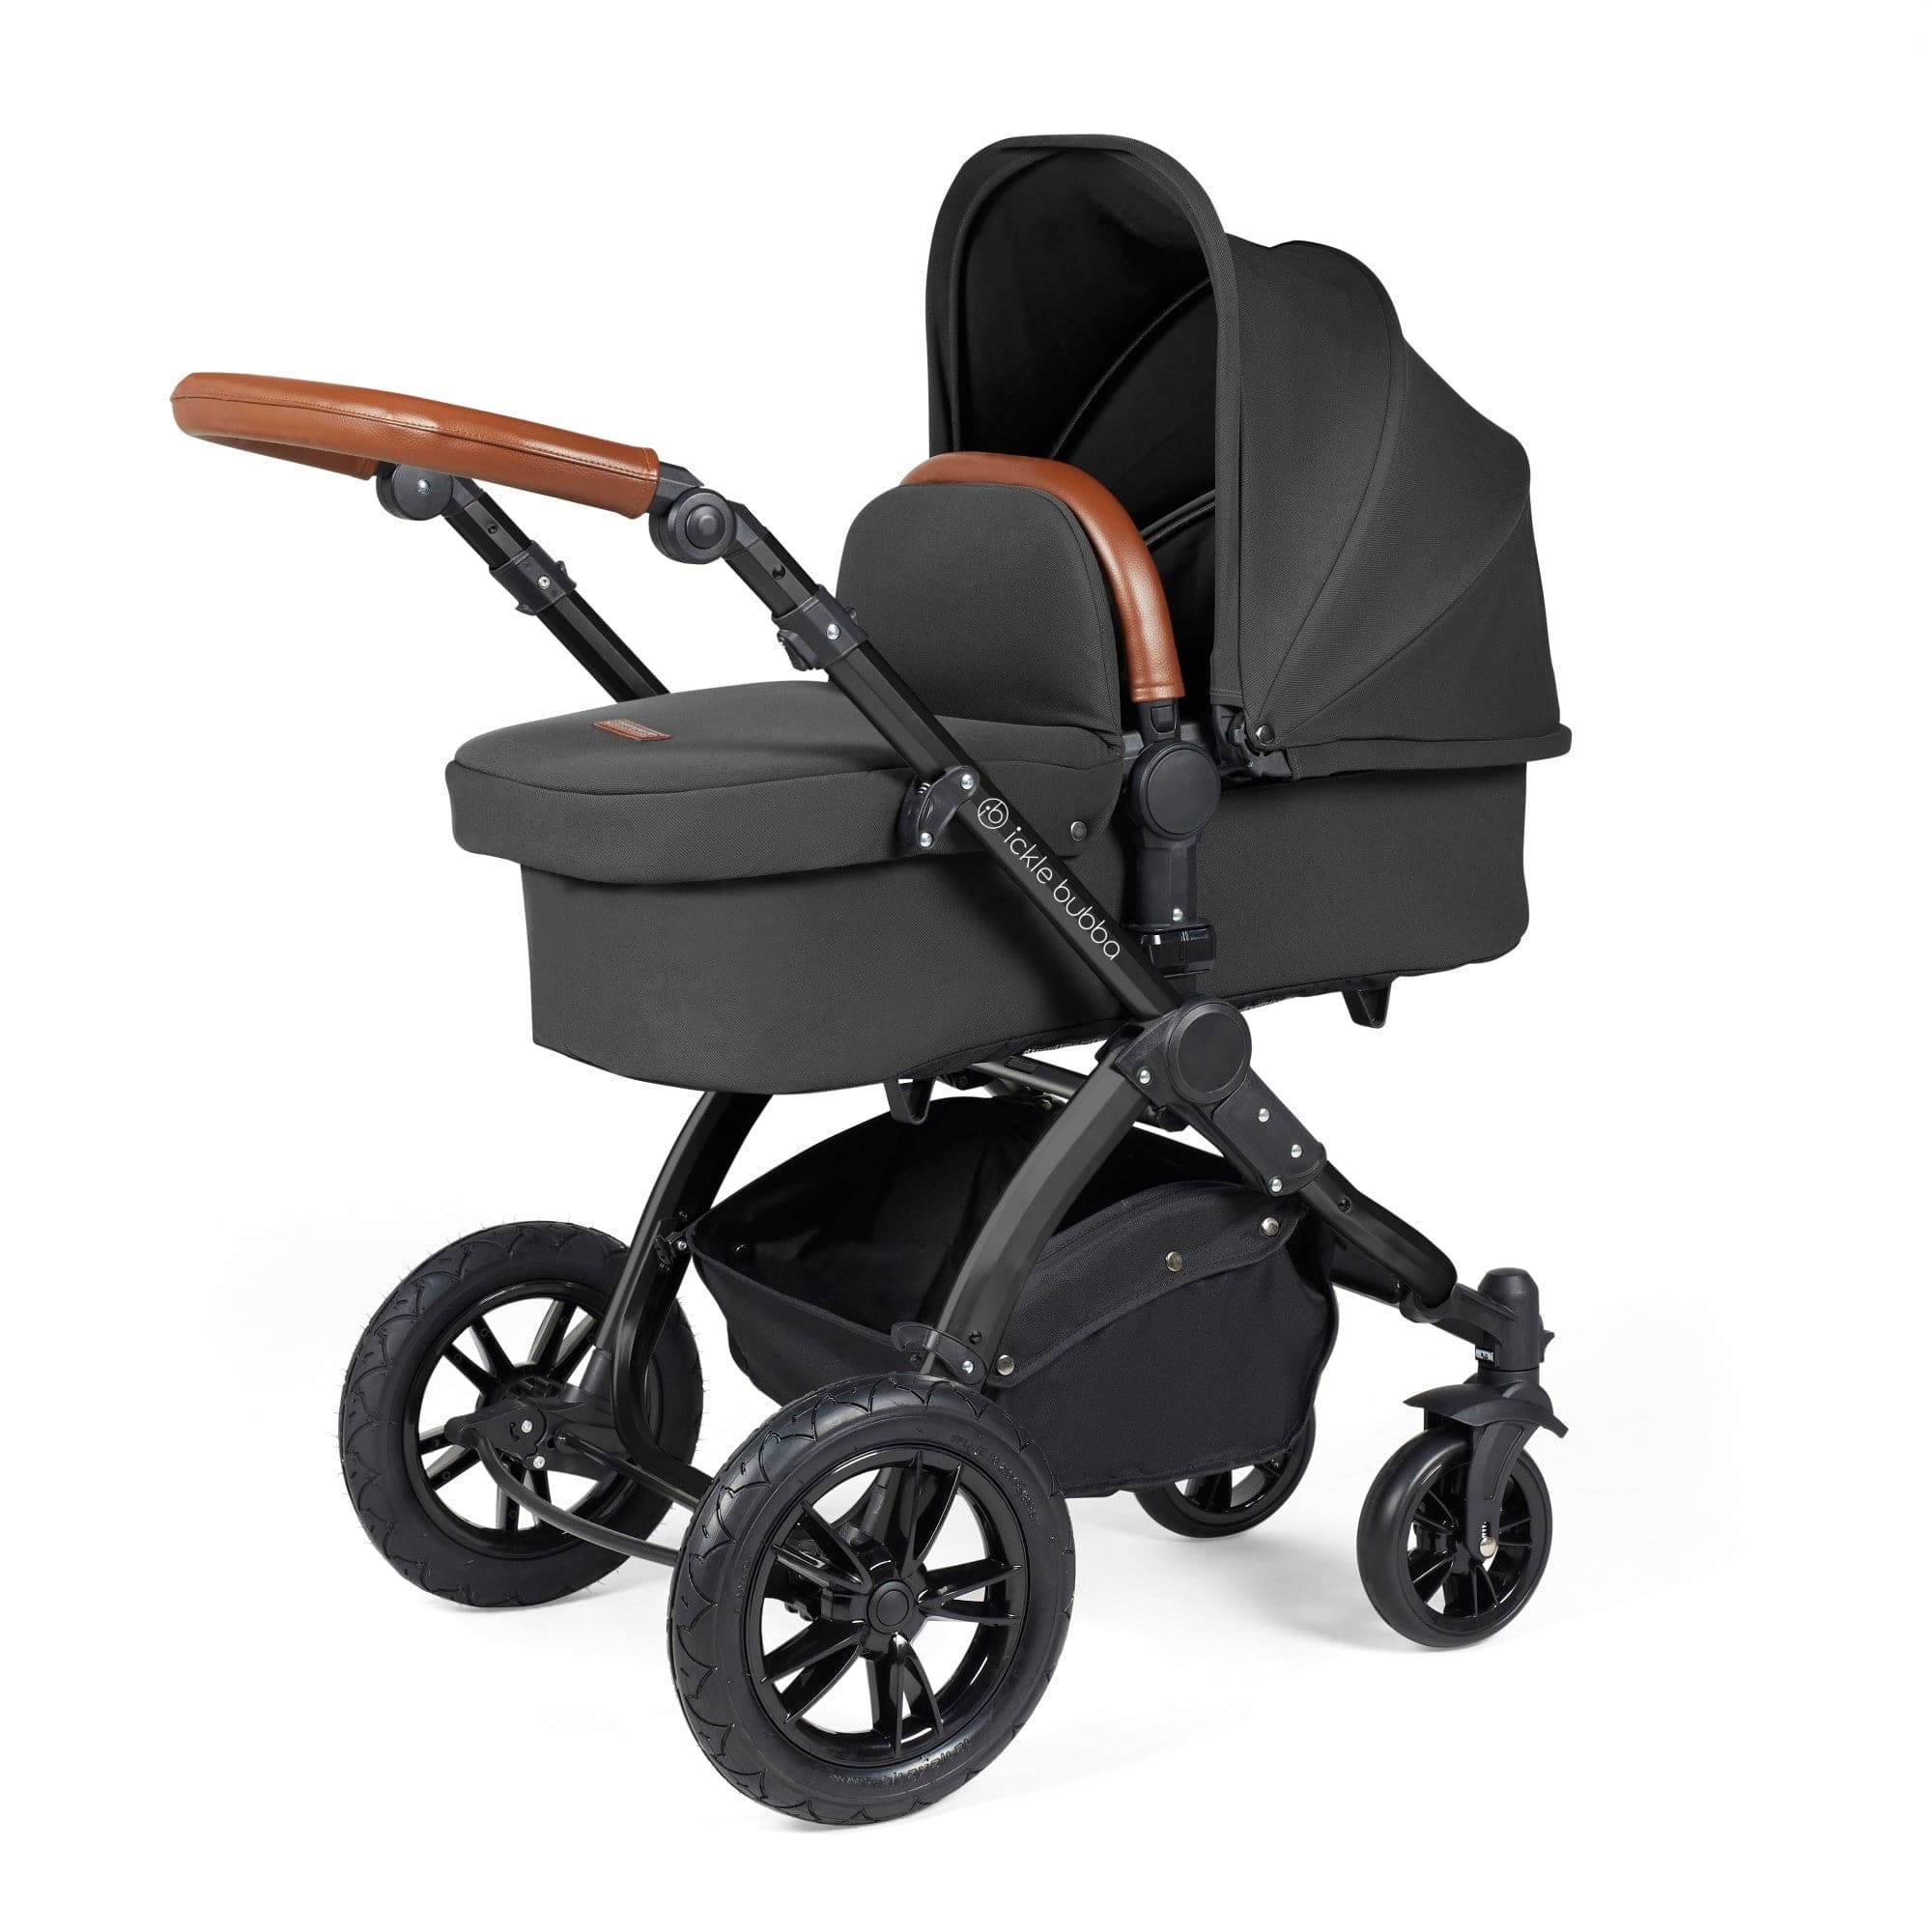 Ickle Bubba Stomp Luxe All-in-One I-Size Travel System With Isofix Base - Black / Charcoal Grey / Tan - For Your Little One